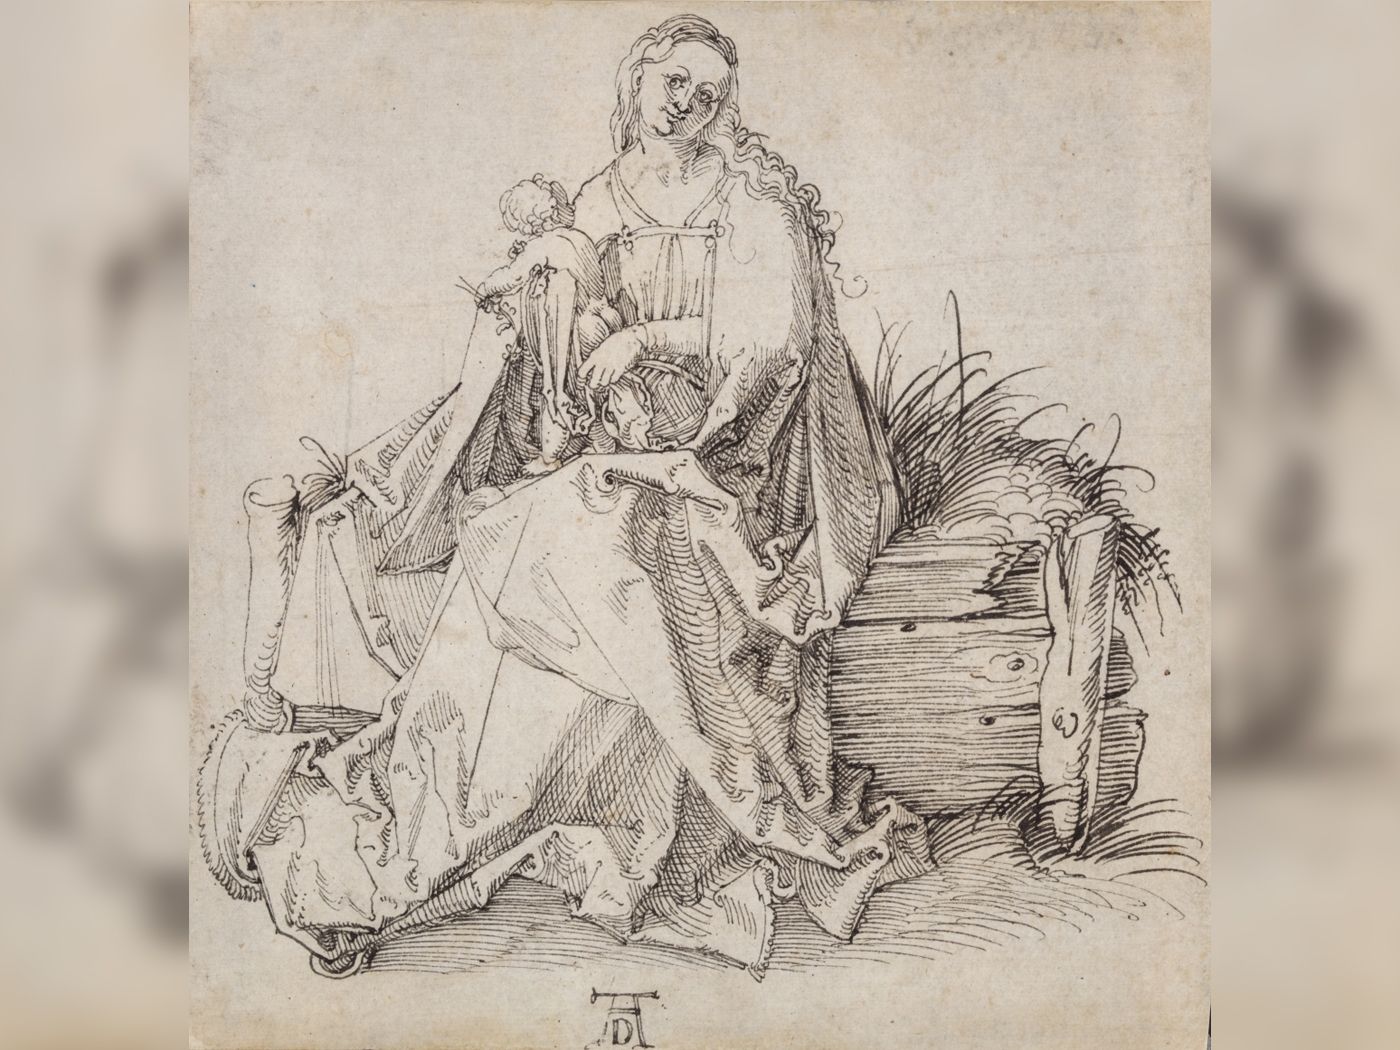 Sketch Bought at Estate Sale for $30 May Be Dürer Drawing Worth $50 Million  | Smart News| Smithsonian Magazine